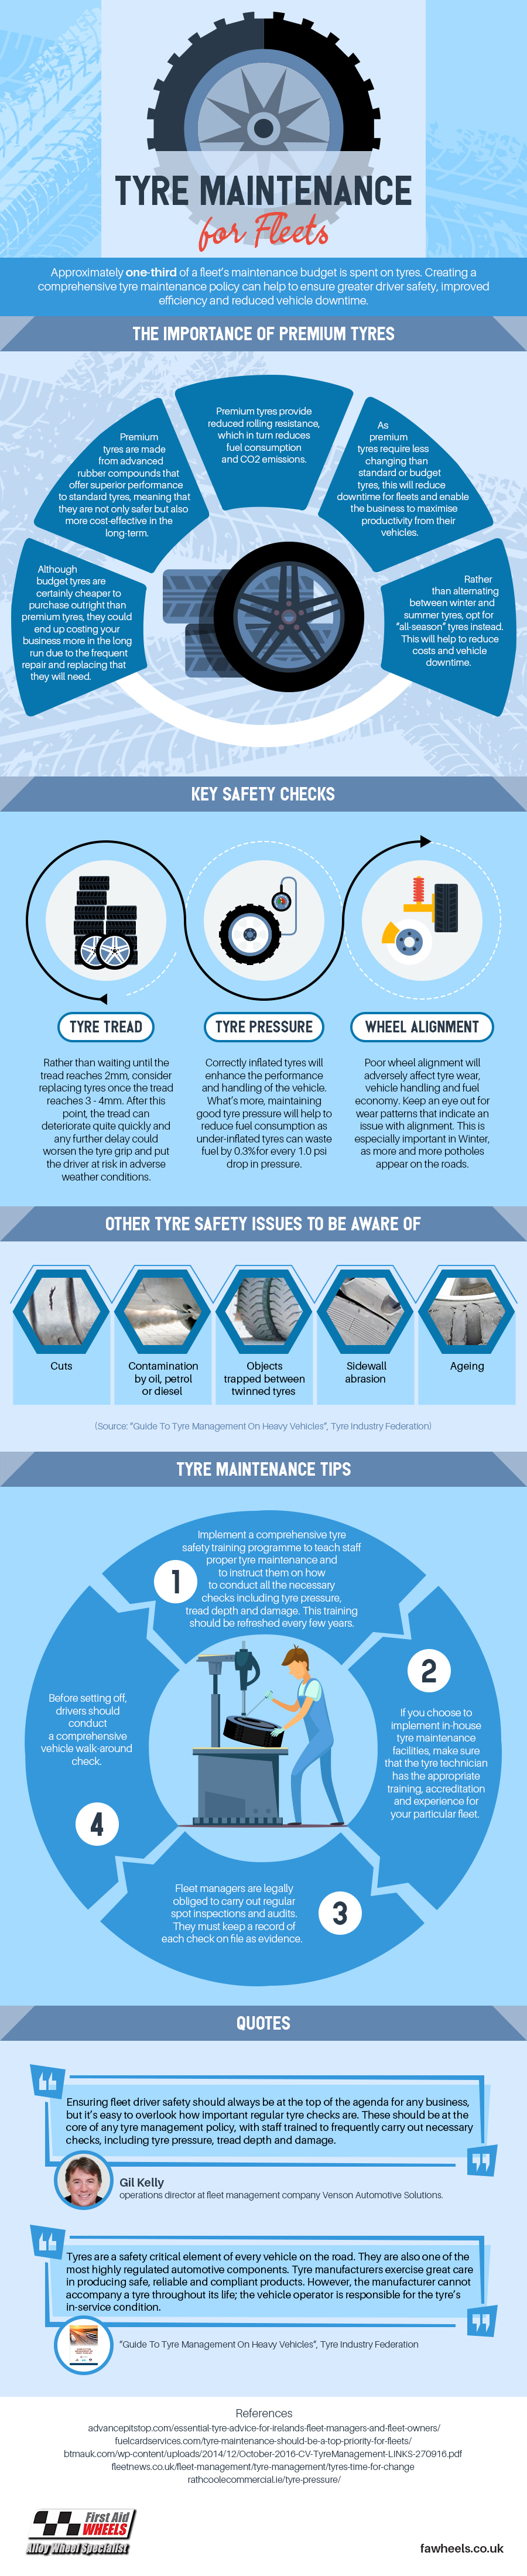 First Aid Wheels highlights the importance of tire maintenance for fleets